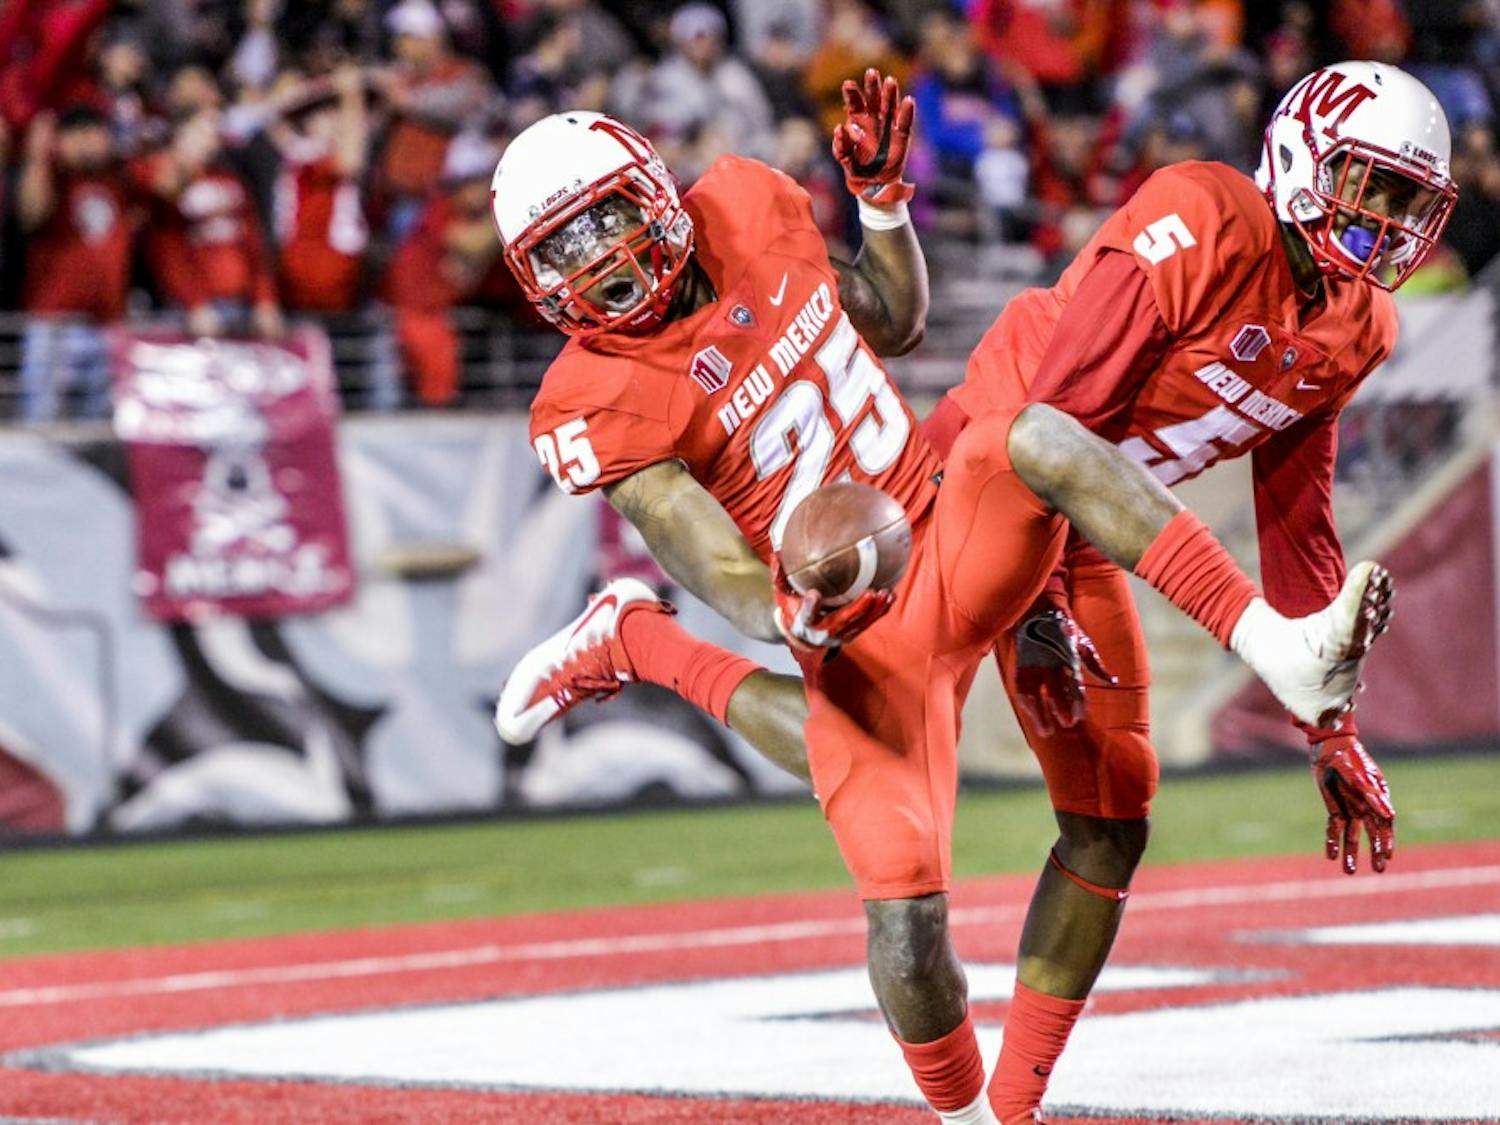 Redshirt sophomore running back Tyrone Owens lands back in the end zone after jumping up and celebrating the Lobos’ first touchdown against Boise State on Friday, Oct. 7, 2016 at University Stadium. The Lobos will play their third conference game against Air Force this Saturday in Dallas, Texas.